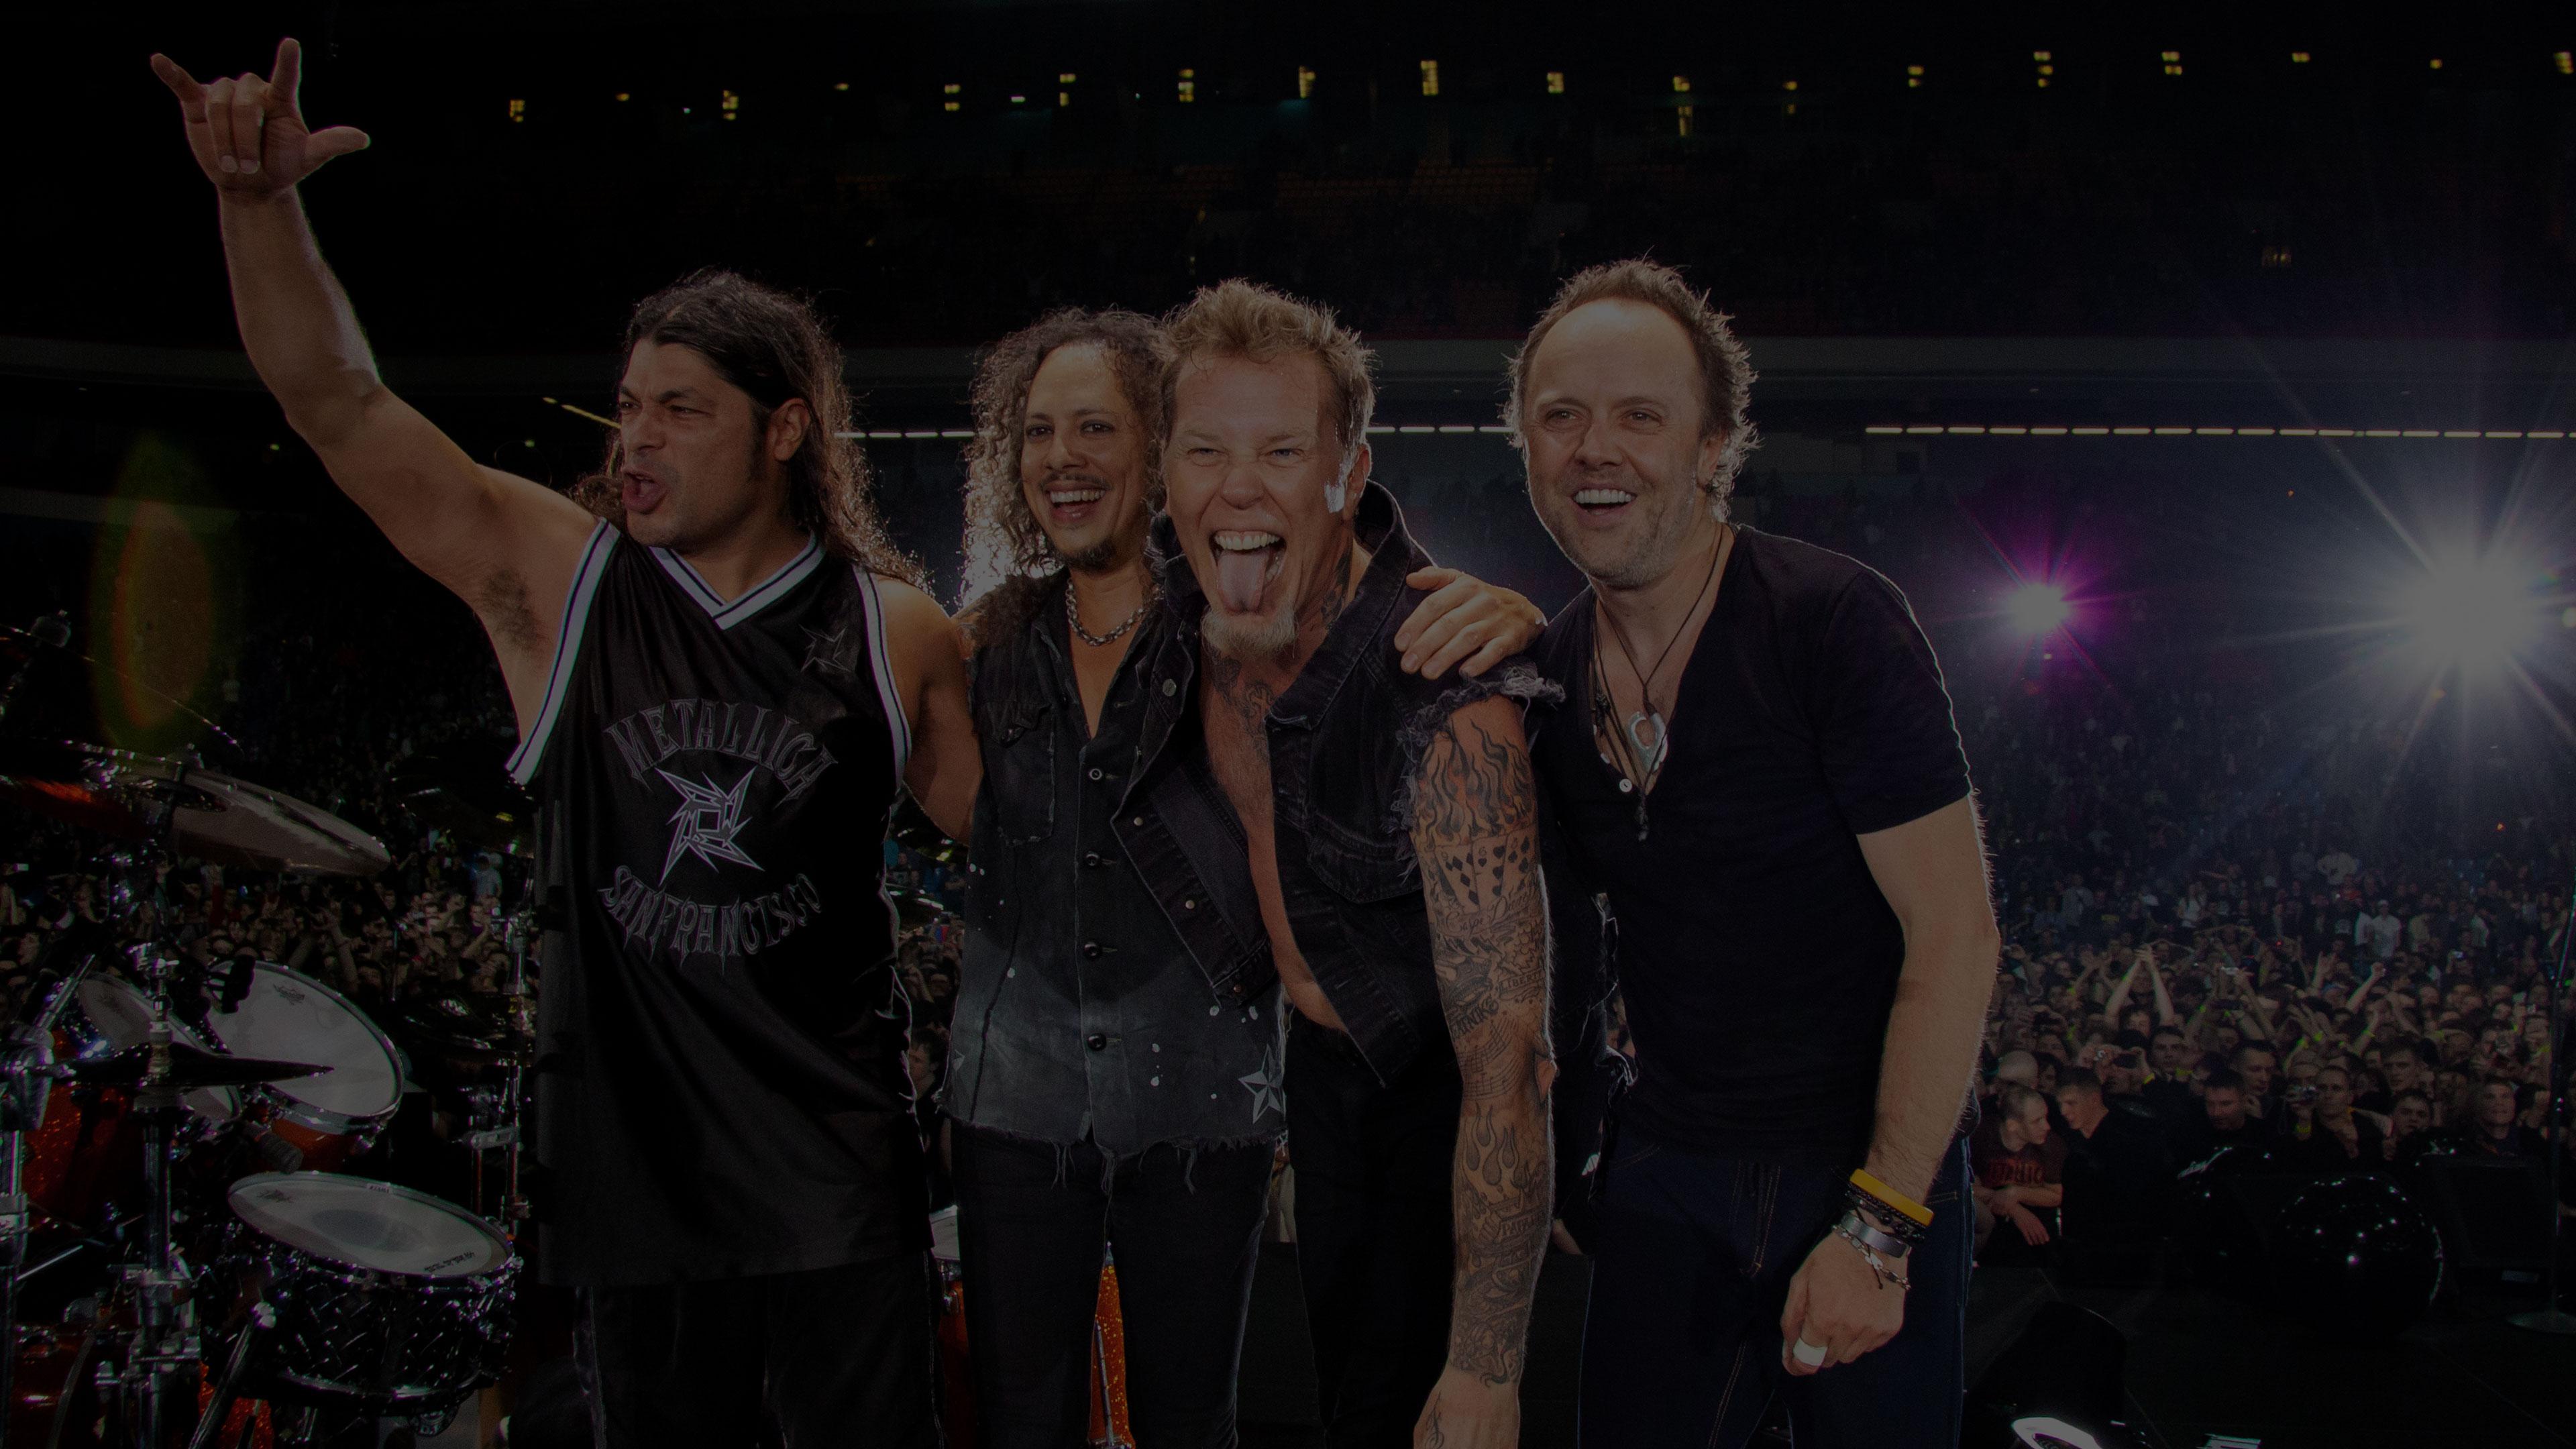 Metallica at Olympijskiy Stadium in Moscow, Russia on April 25, 2010